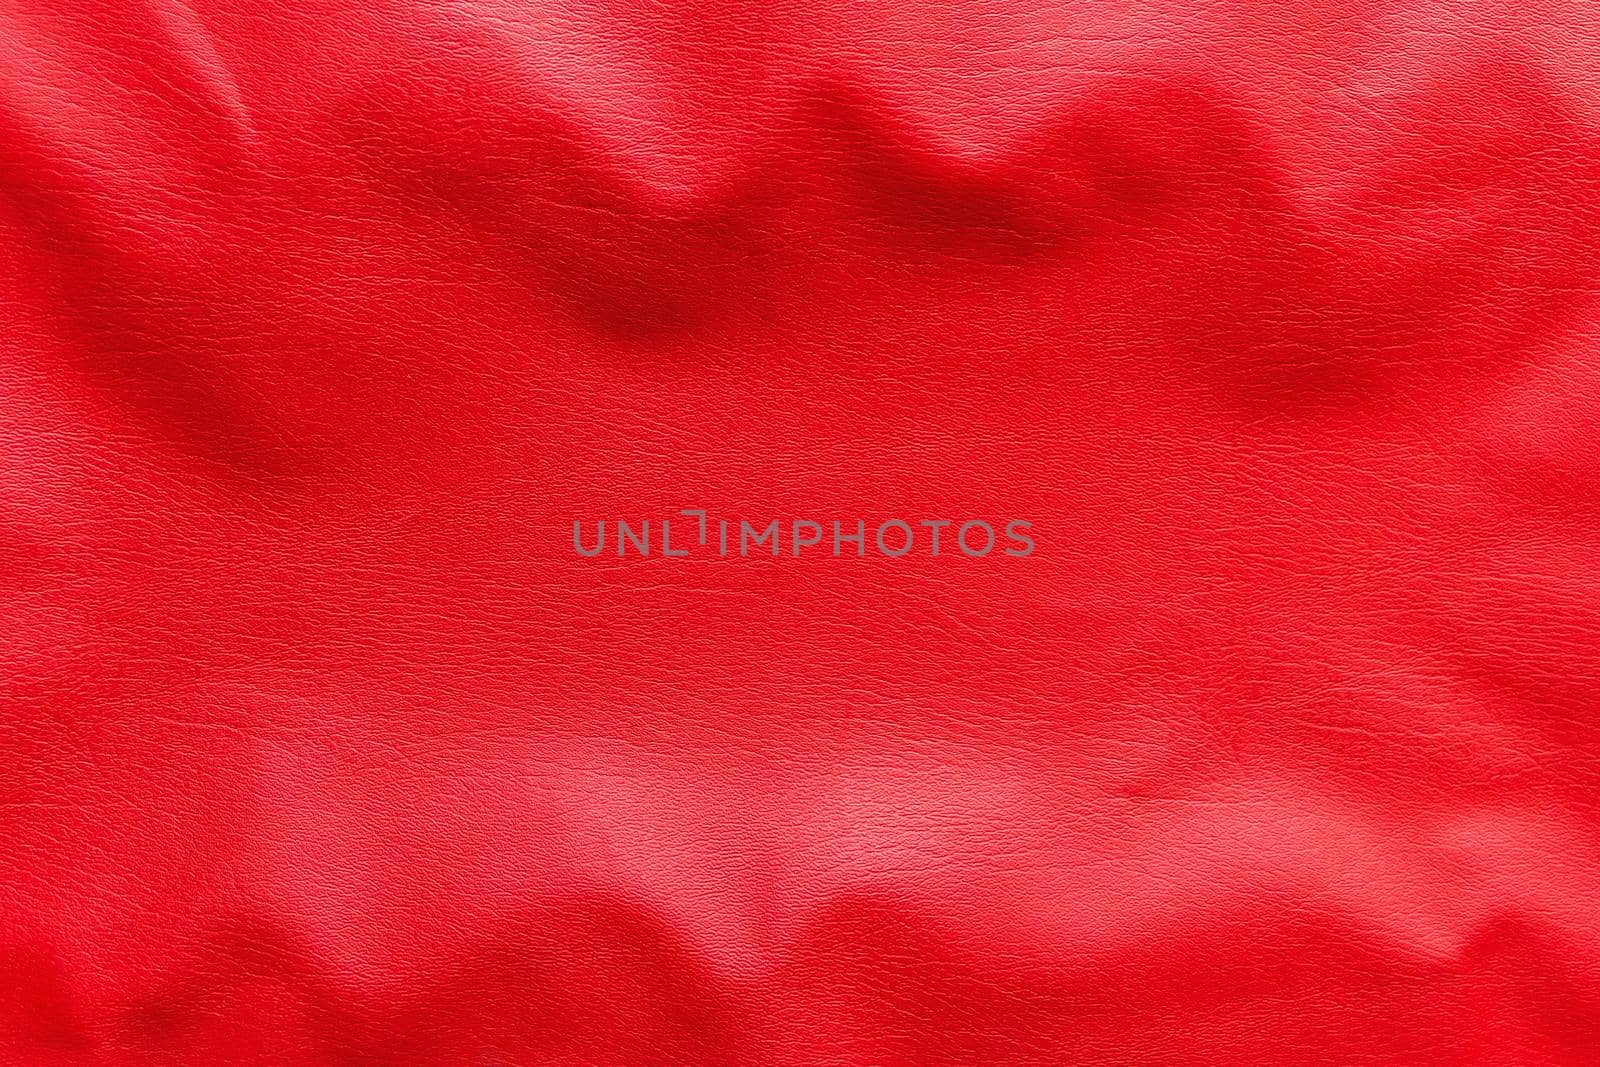 Wavy texture of red faux leather background, close-up.